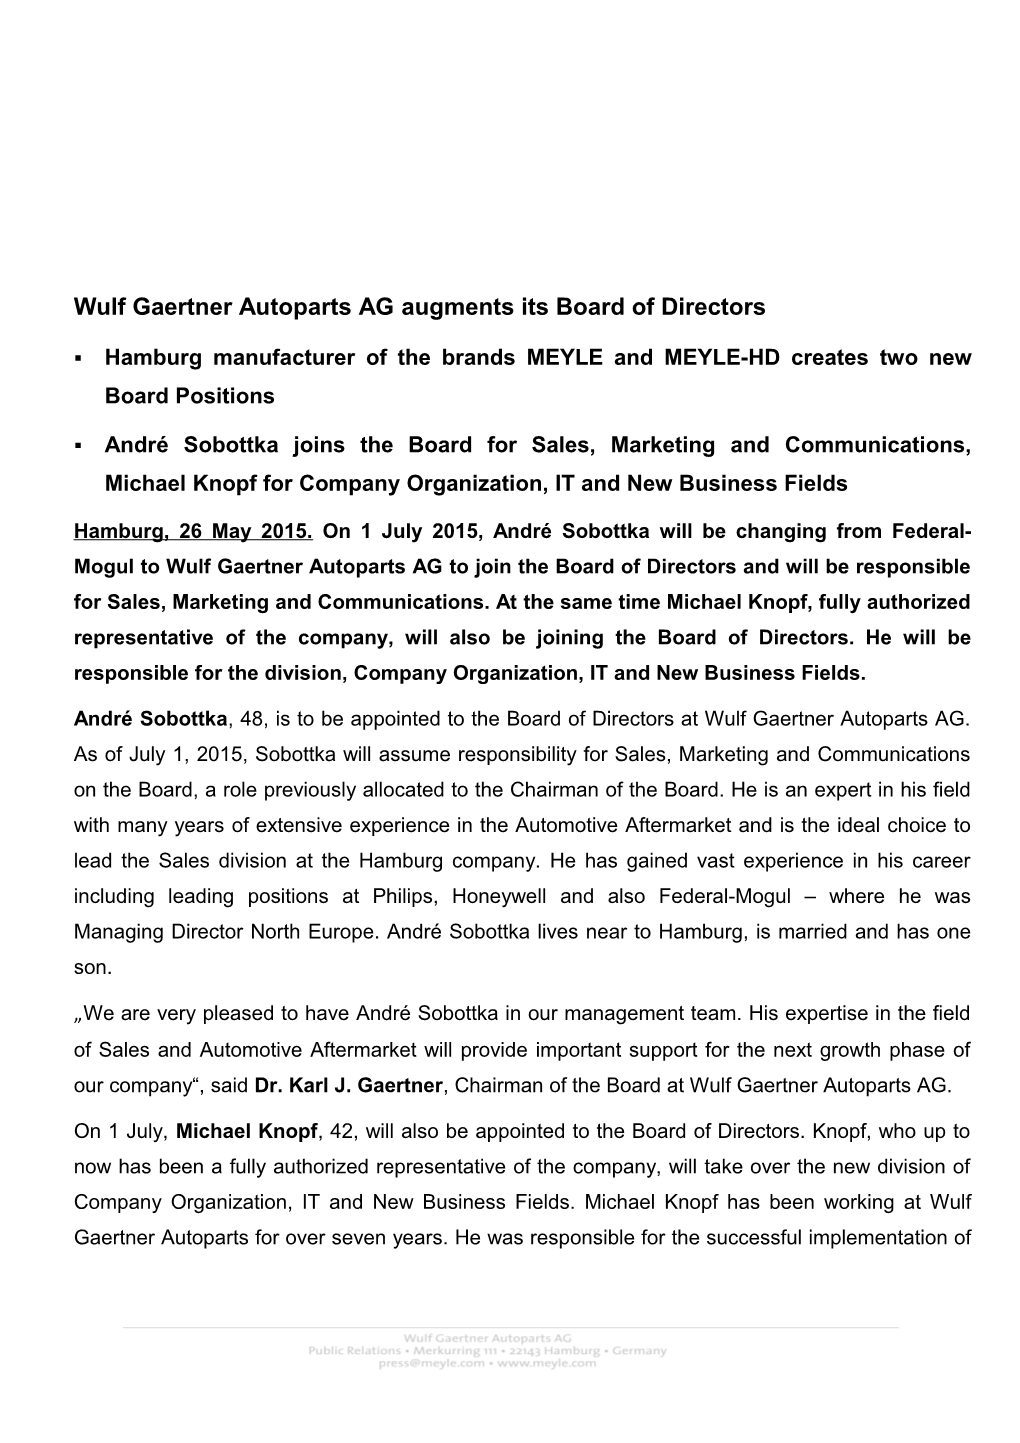 Wulf Gaertner Autoparts AG Augments Its Board of Directors